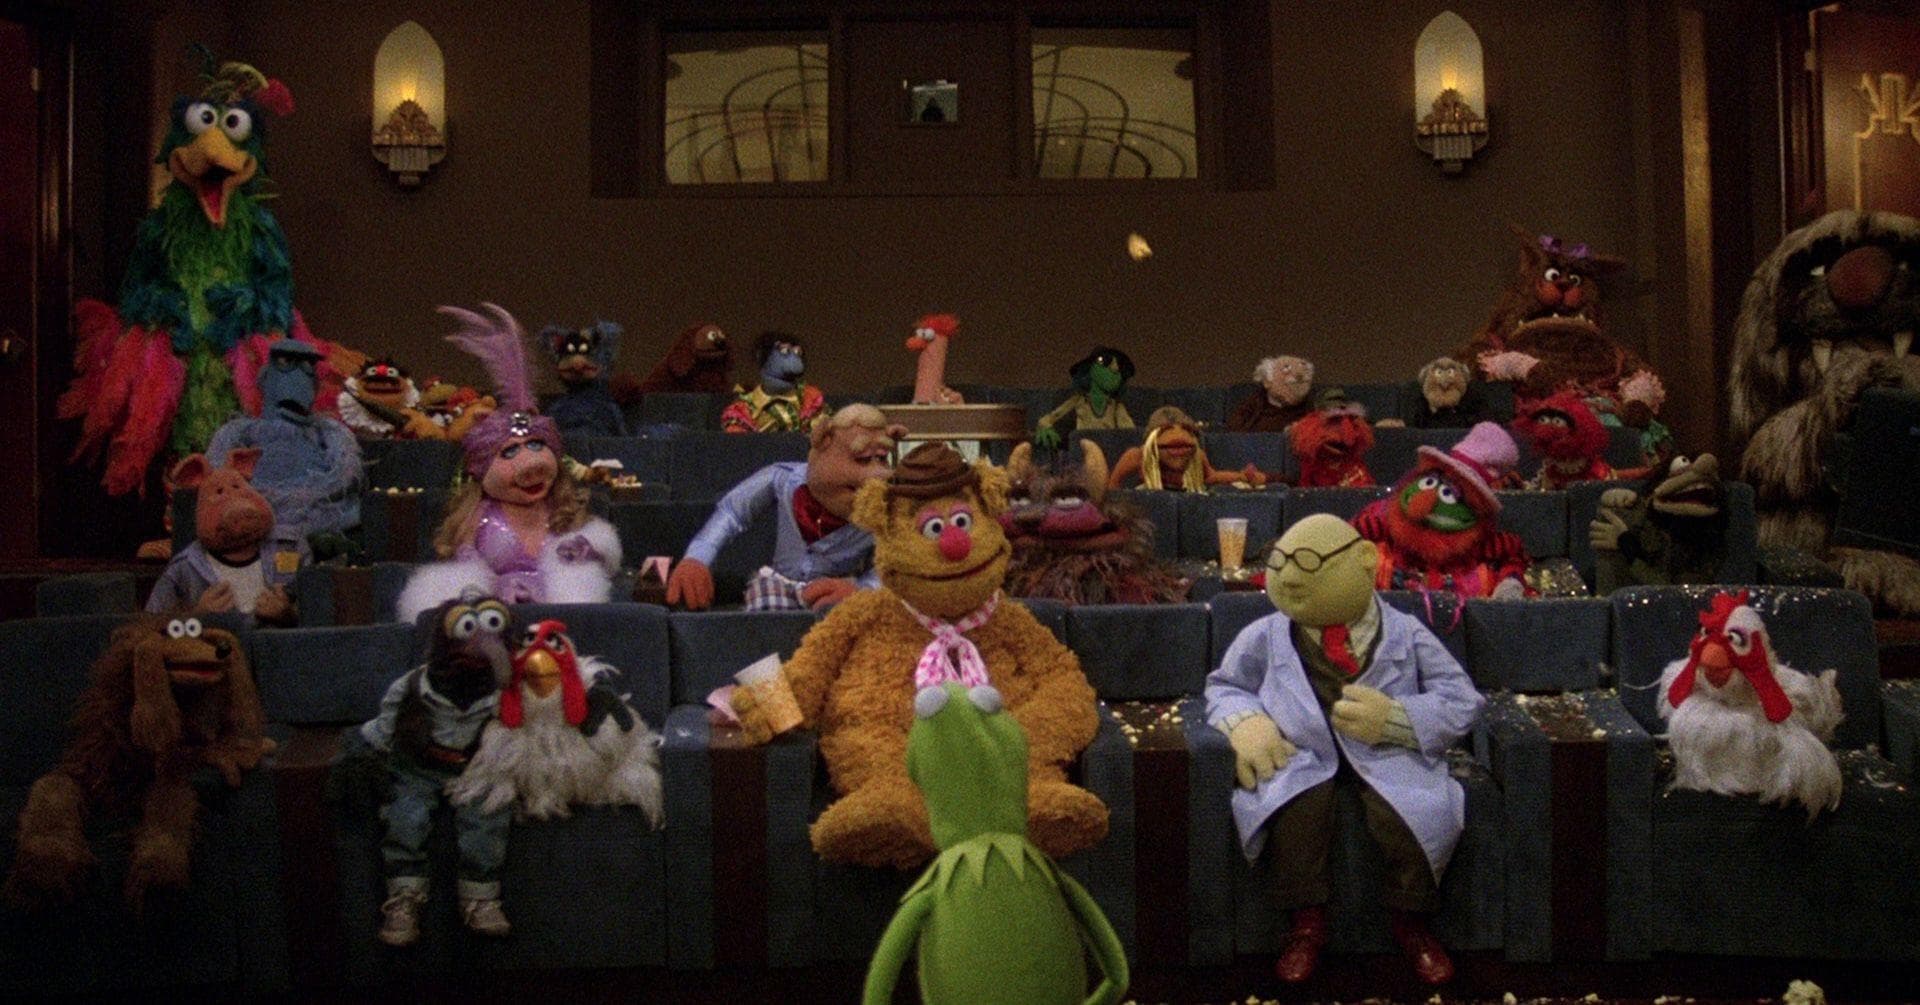 The Best Quotes From The Muppet Movie (1979)